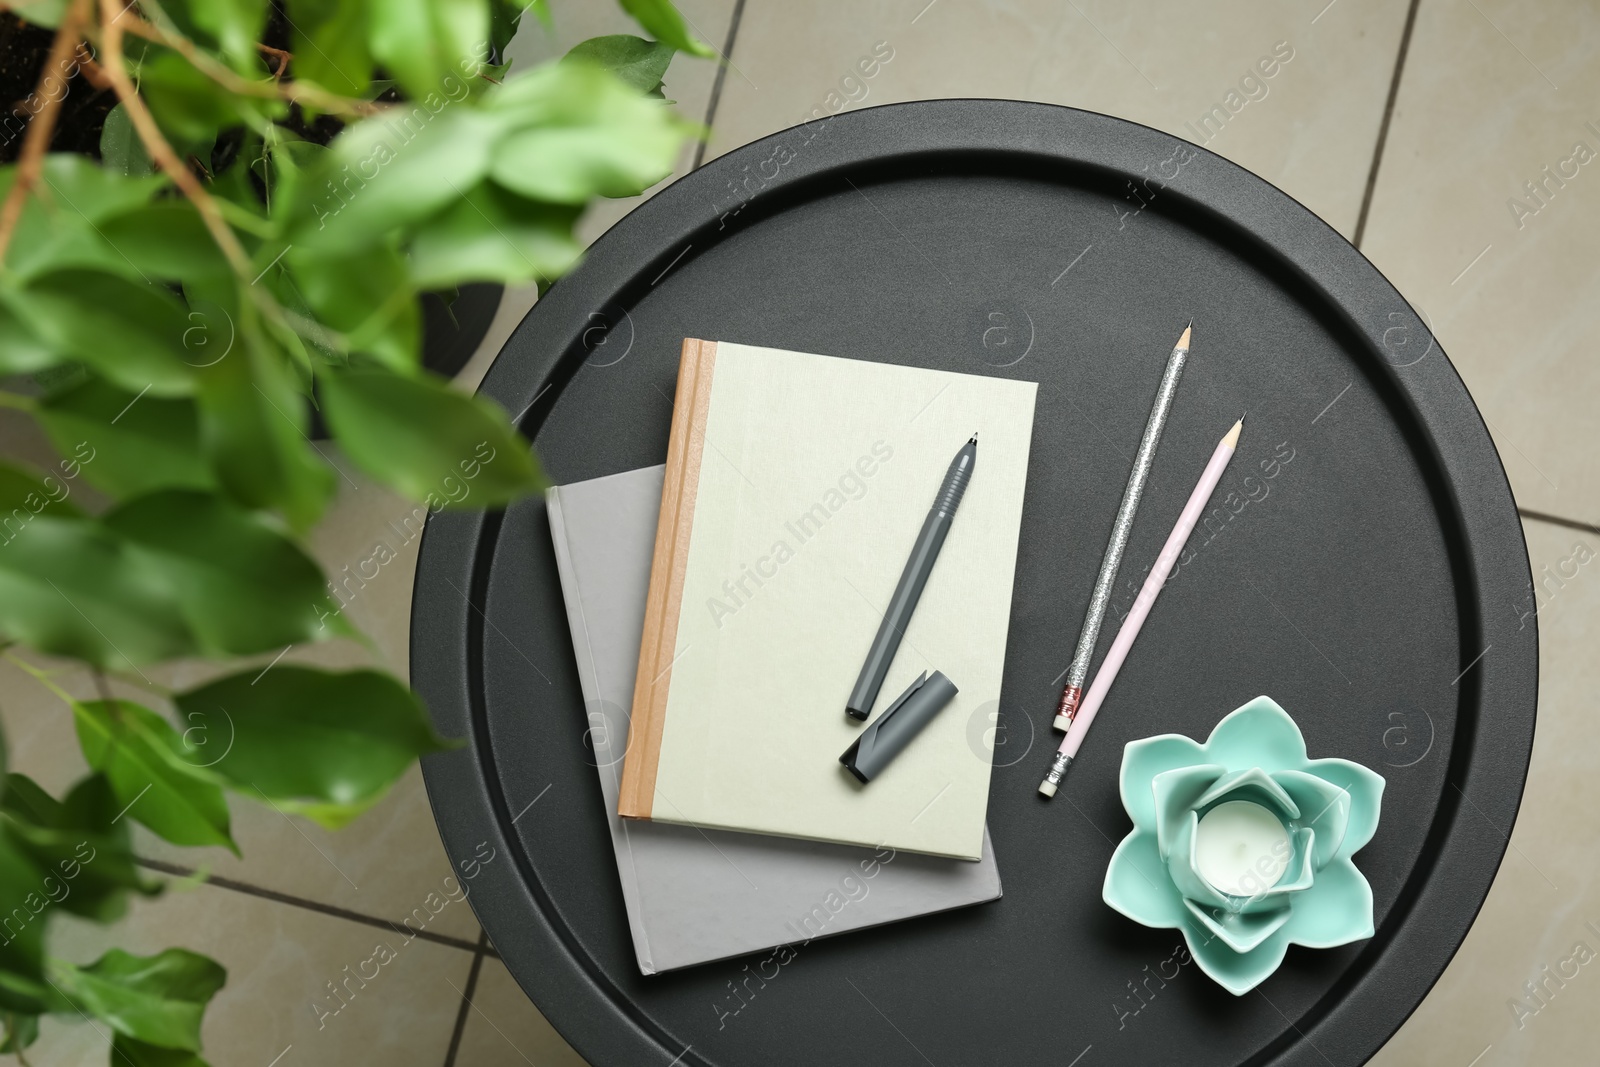 Photo of Notebooks, pen, pencils and decor on round table indoors, top view